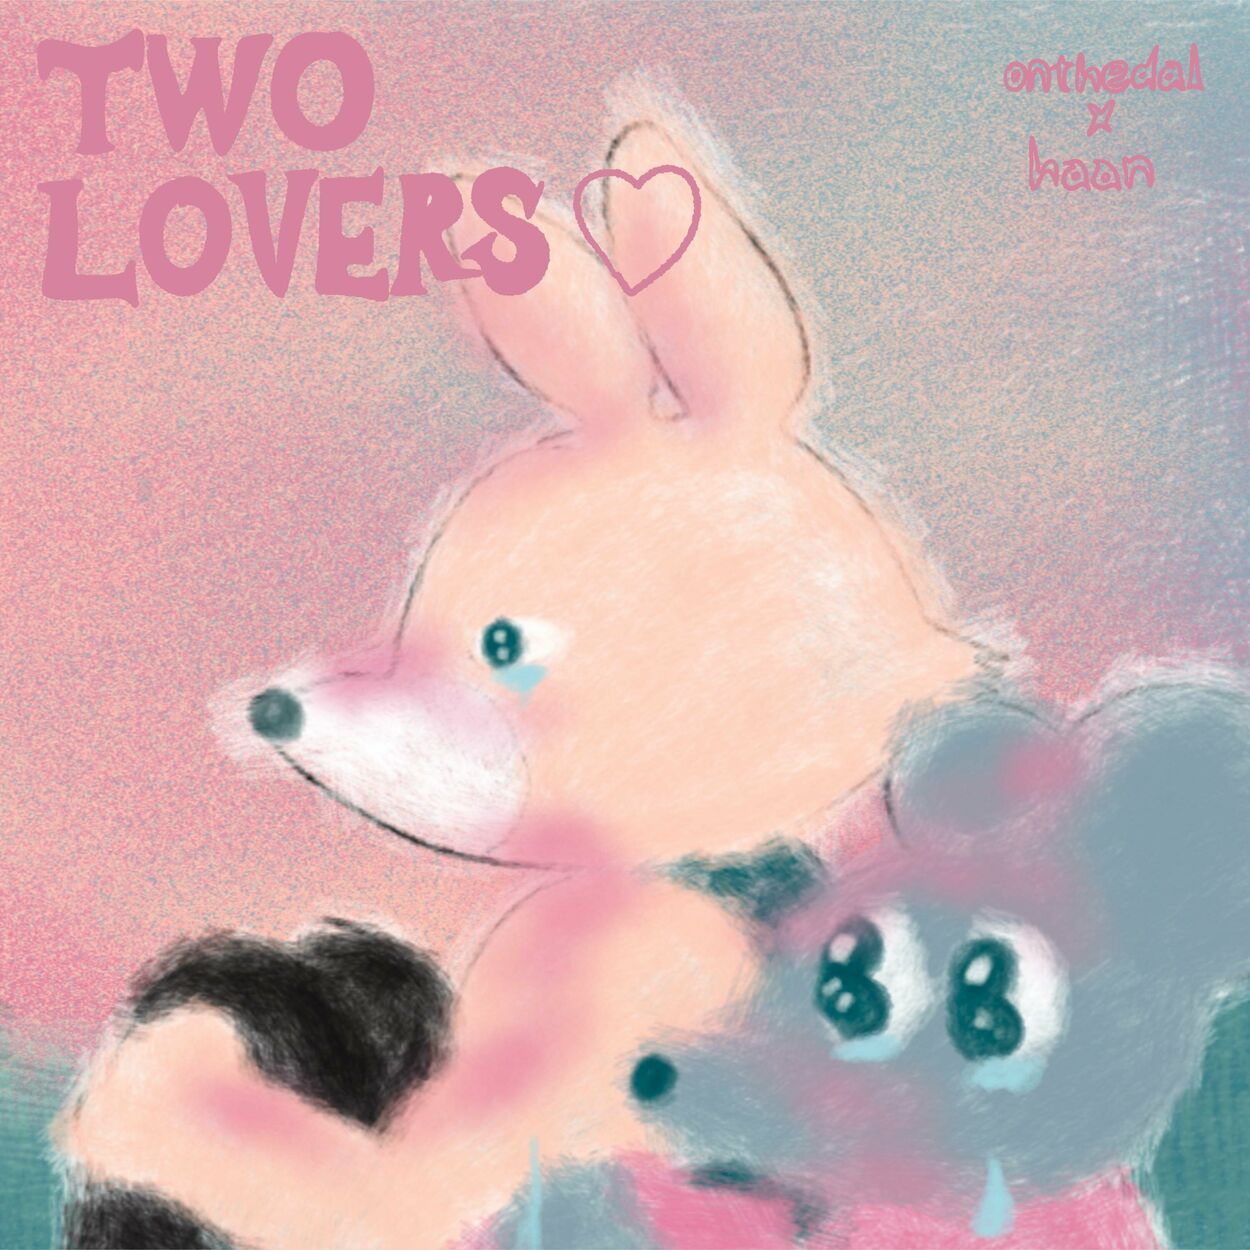 onthedal – Two Lovers – Single